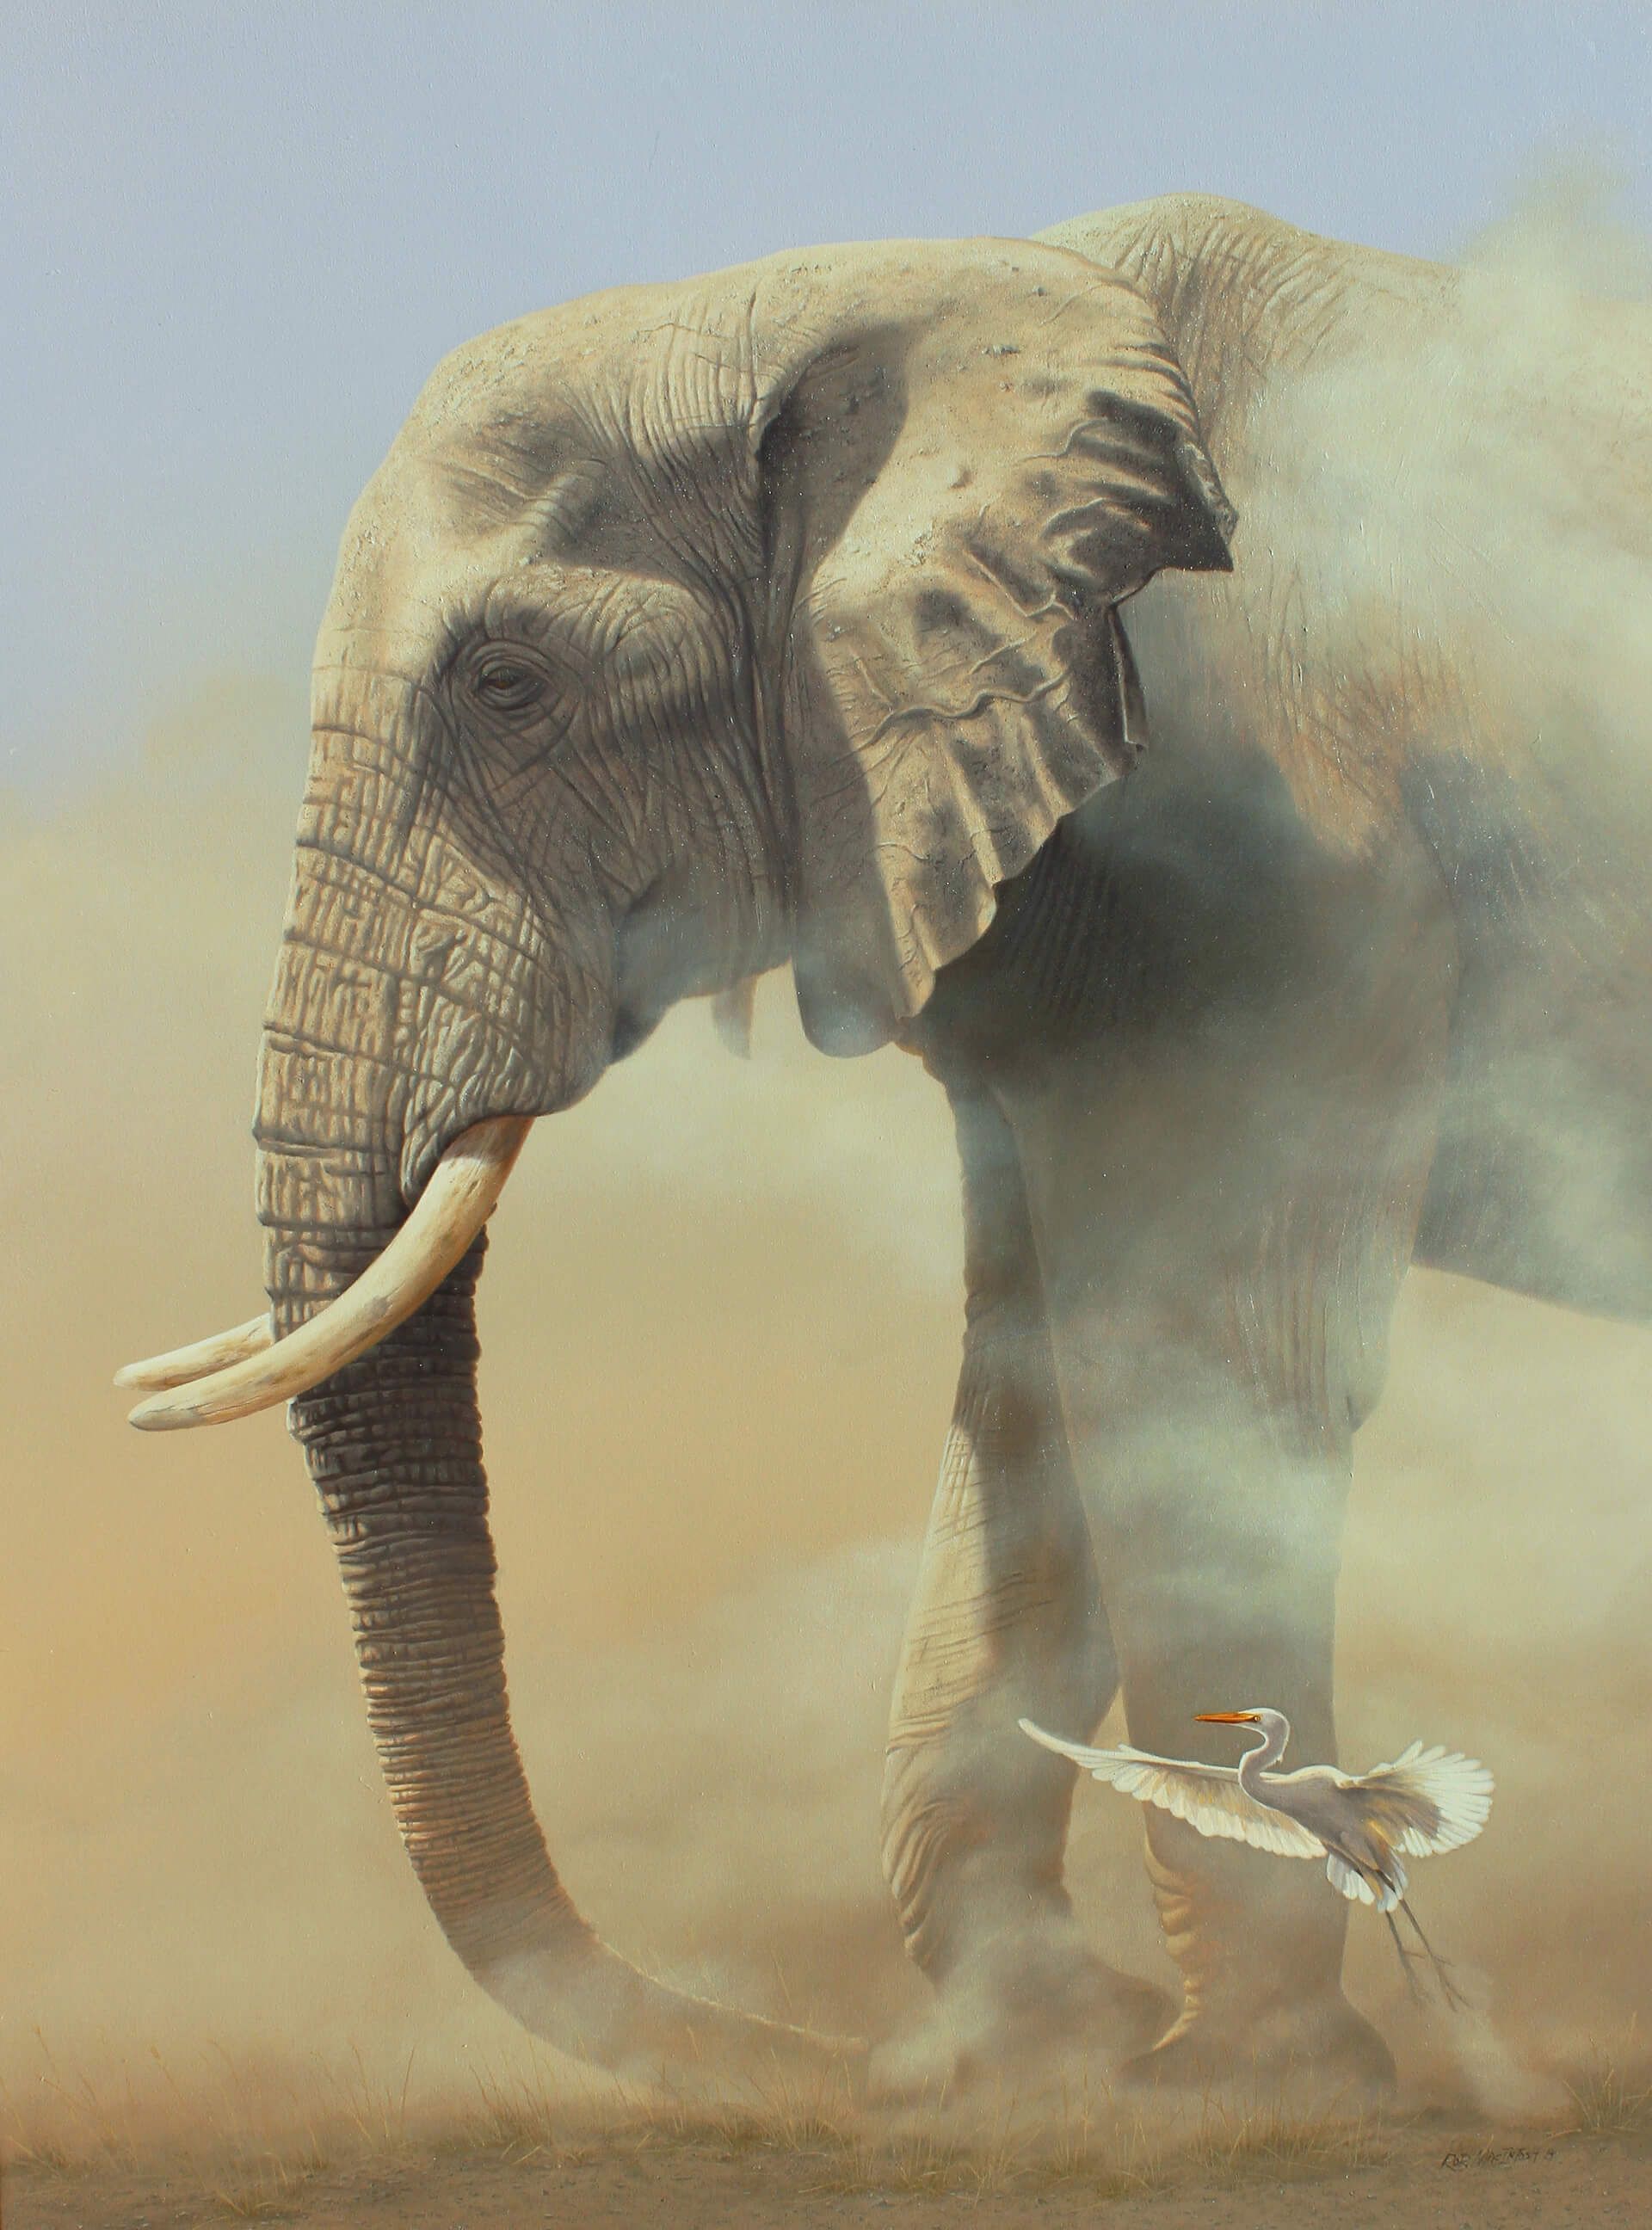 Photorealistic painting of an elephant walking through dust